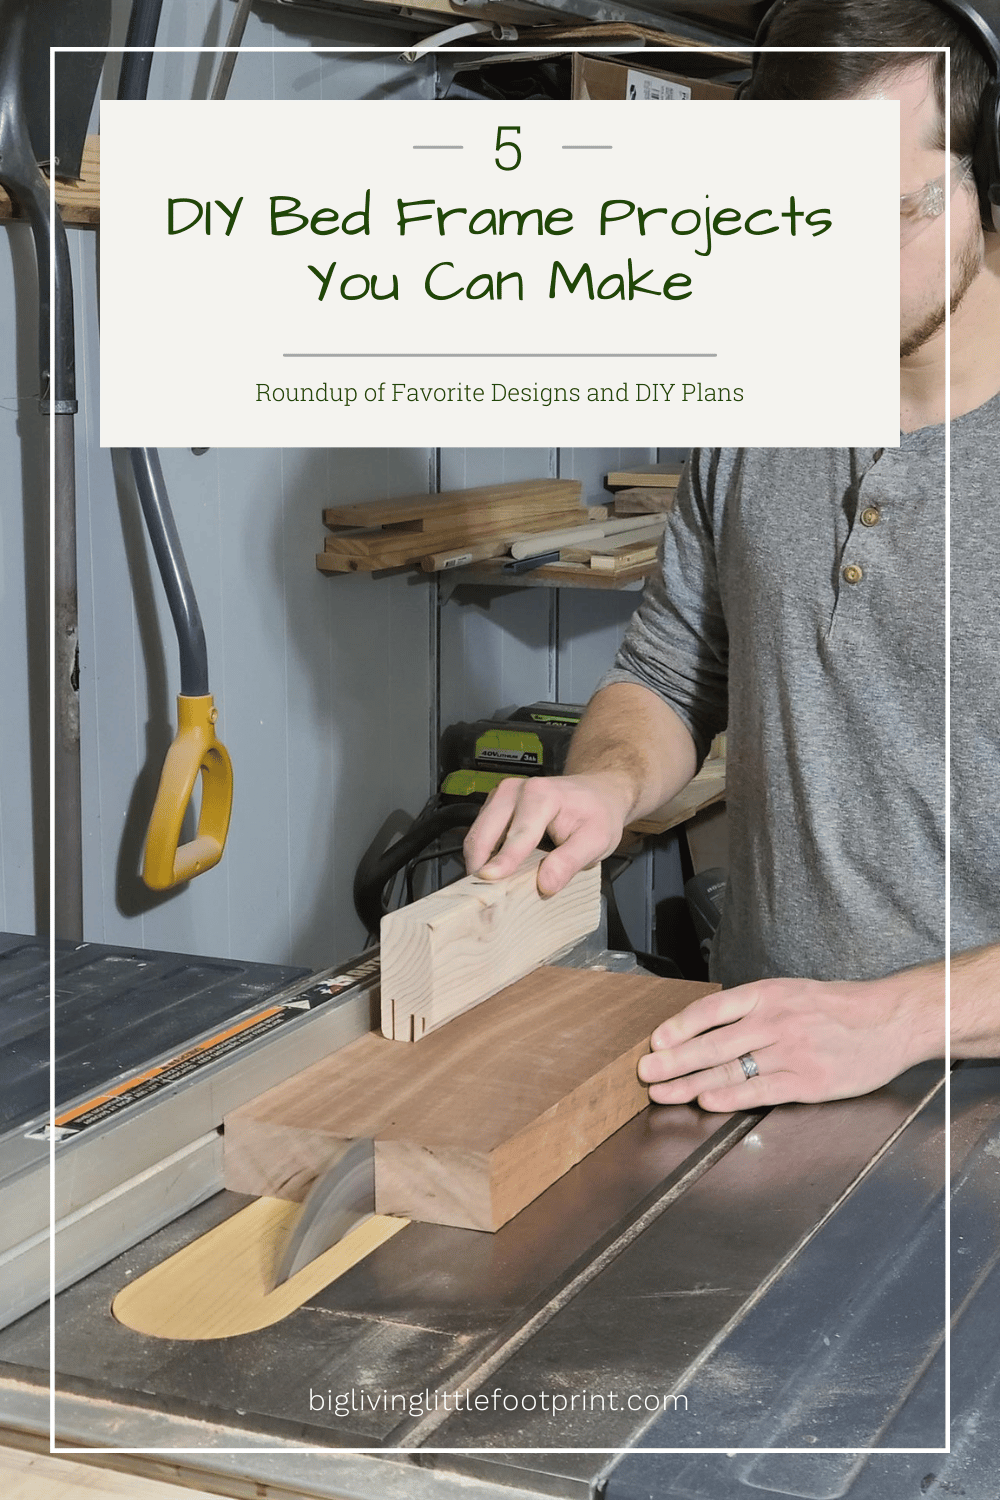 5 DIY bed frame projects you can make - showing a man cutting some wood on a table saw